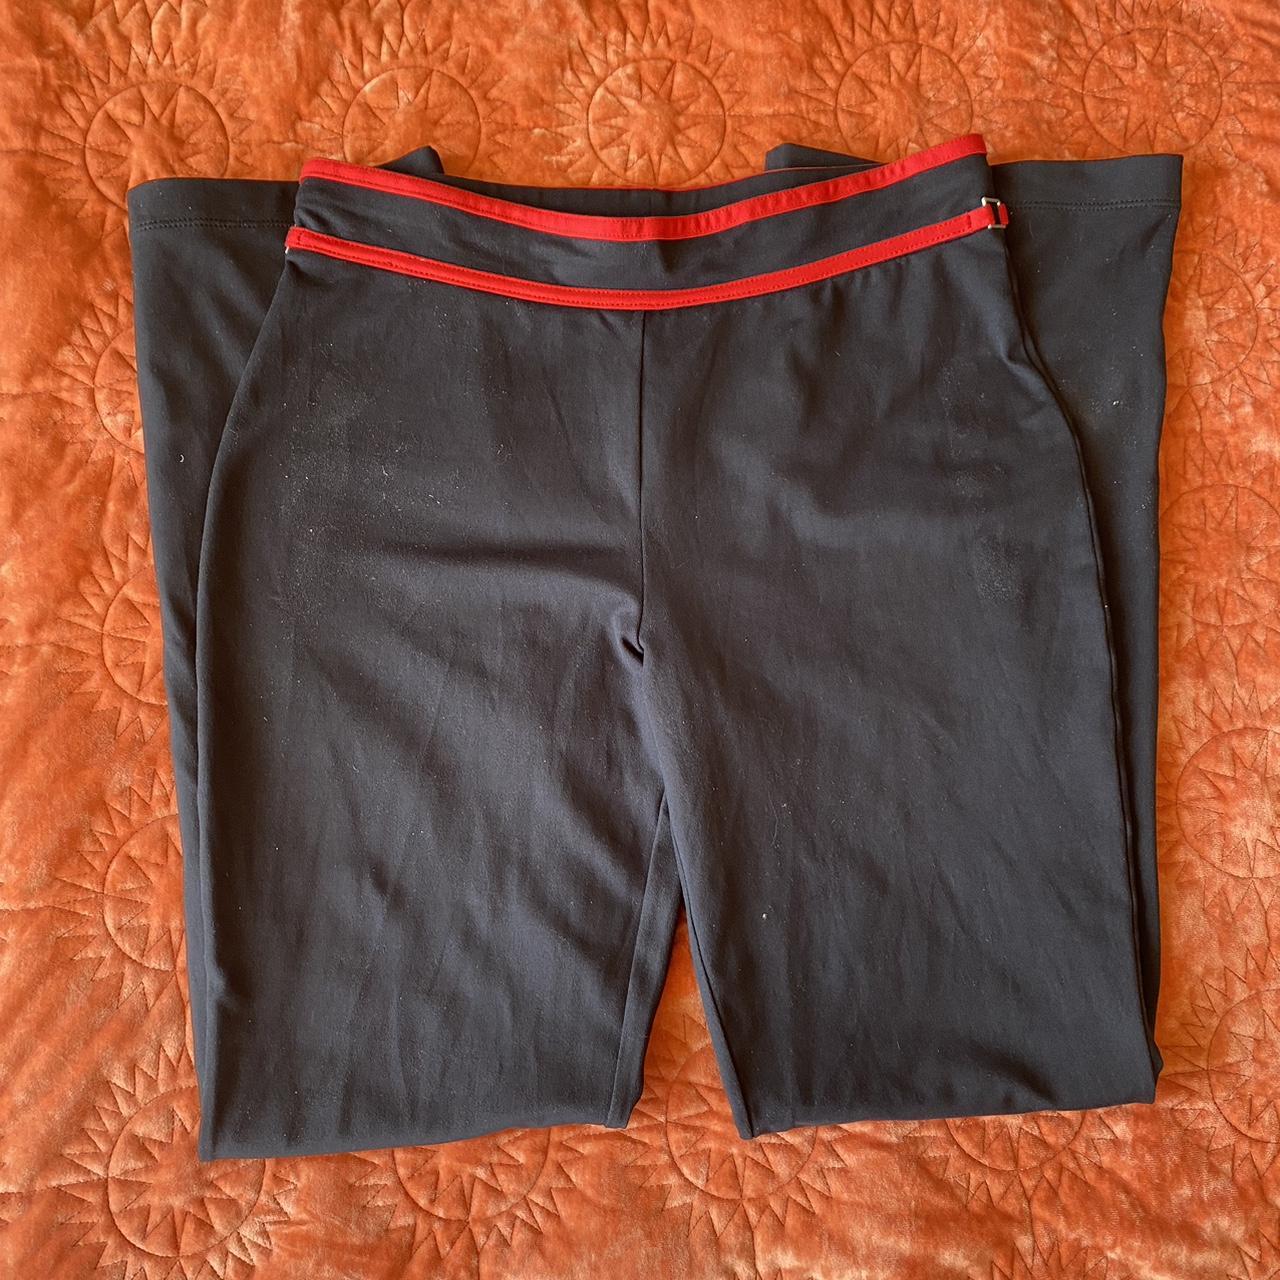 danskin yoga pants with red detail size small - Depop